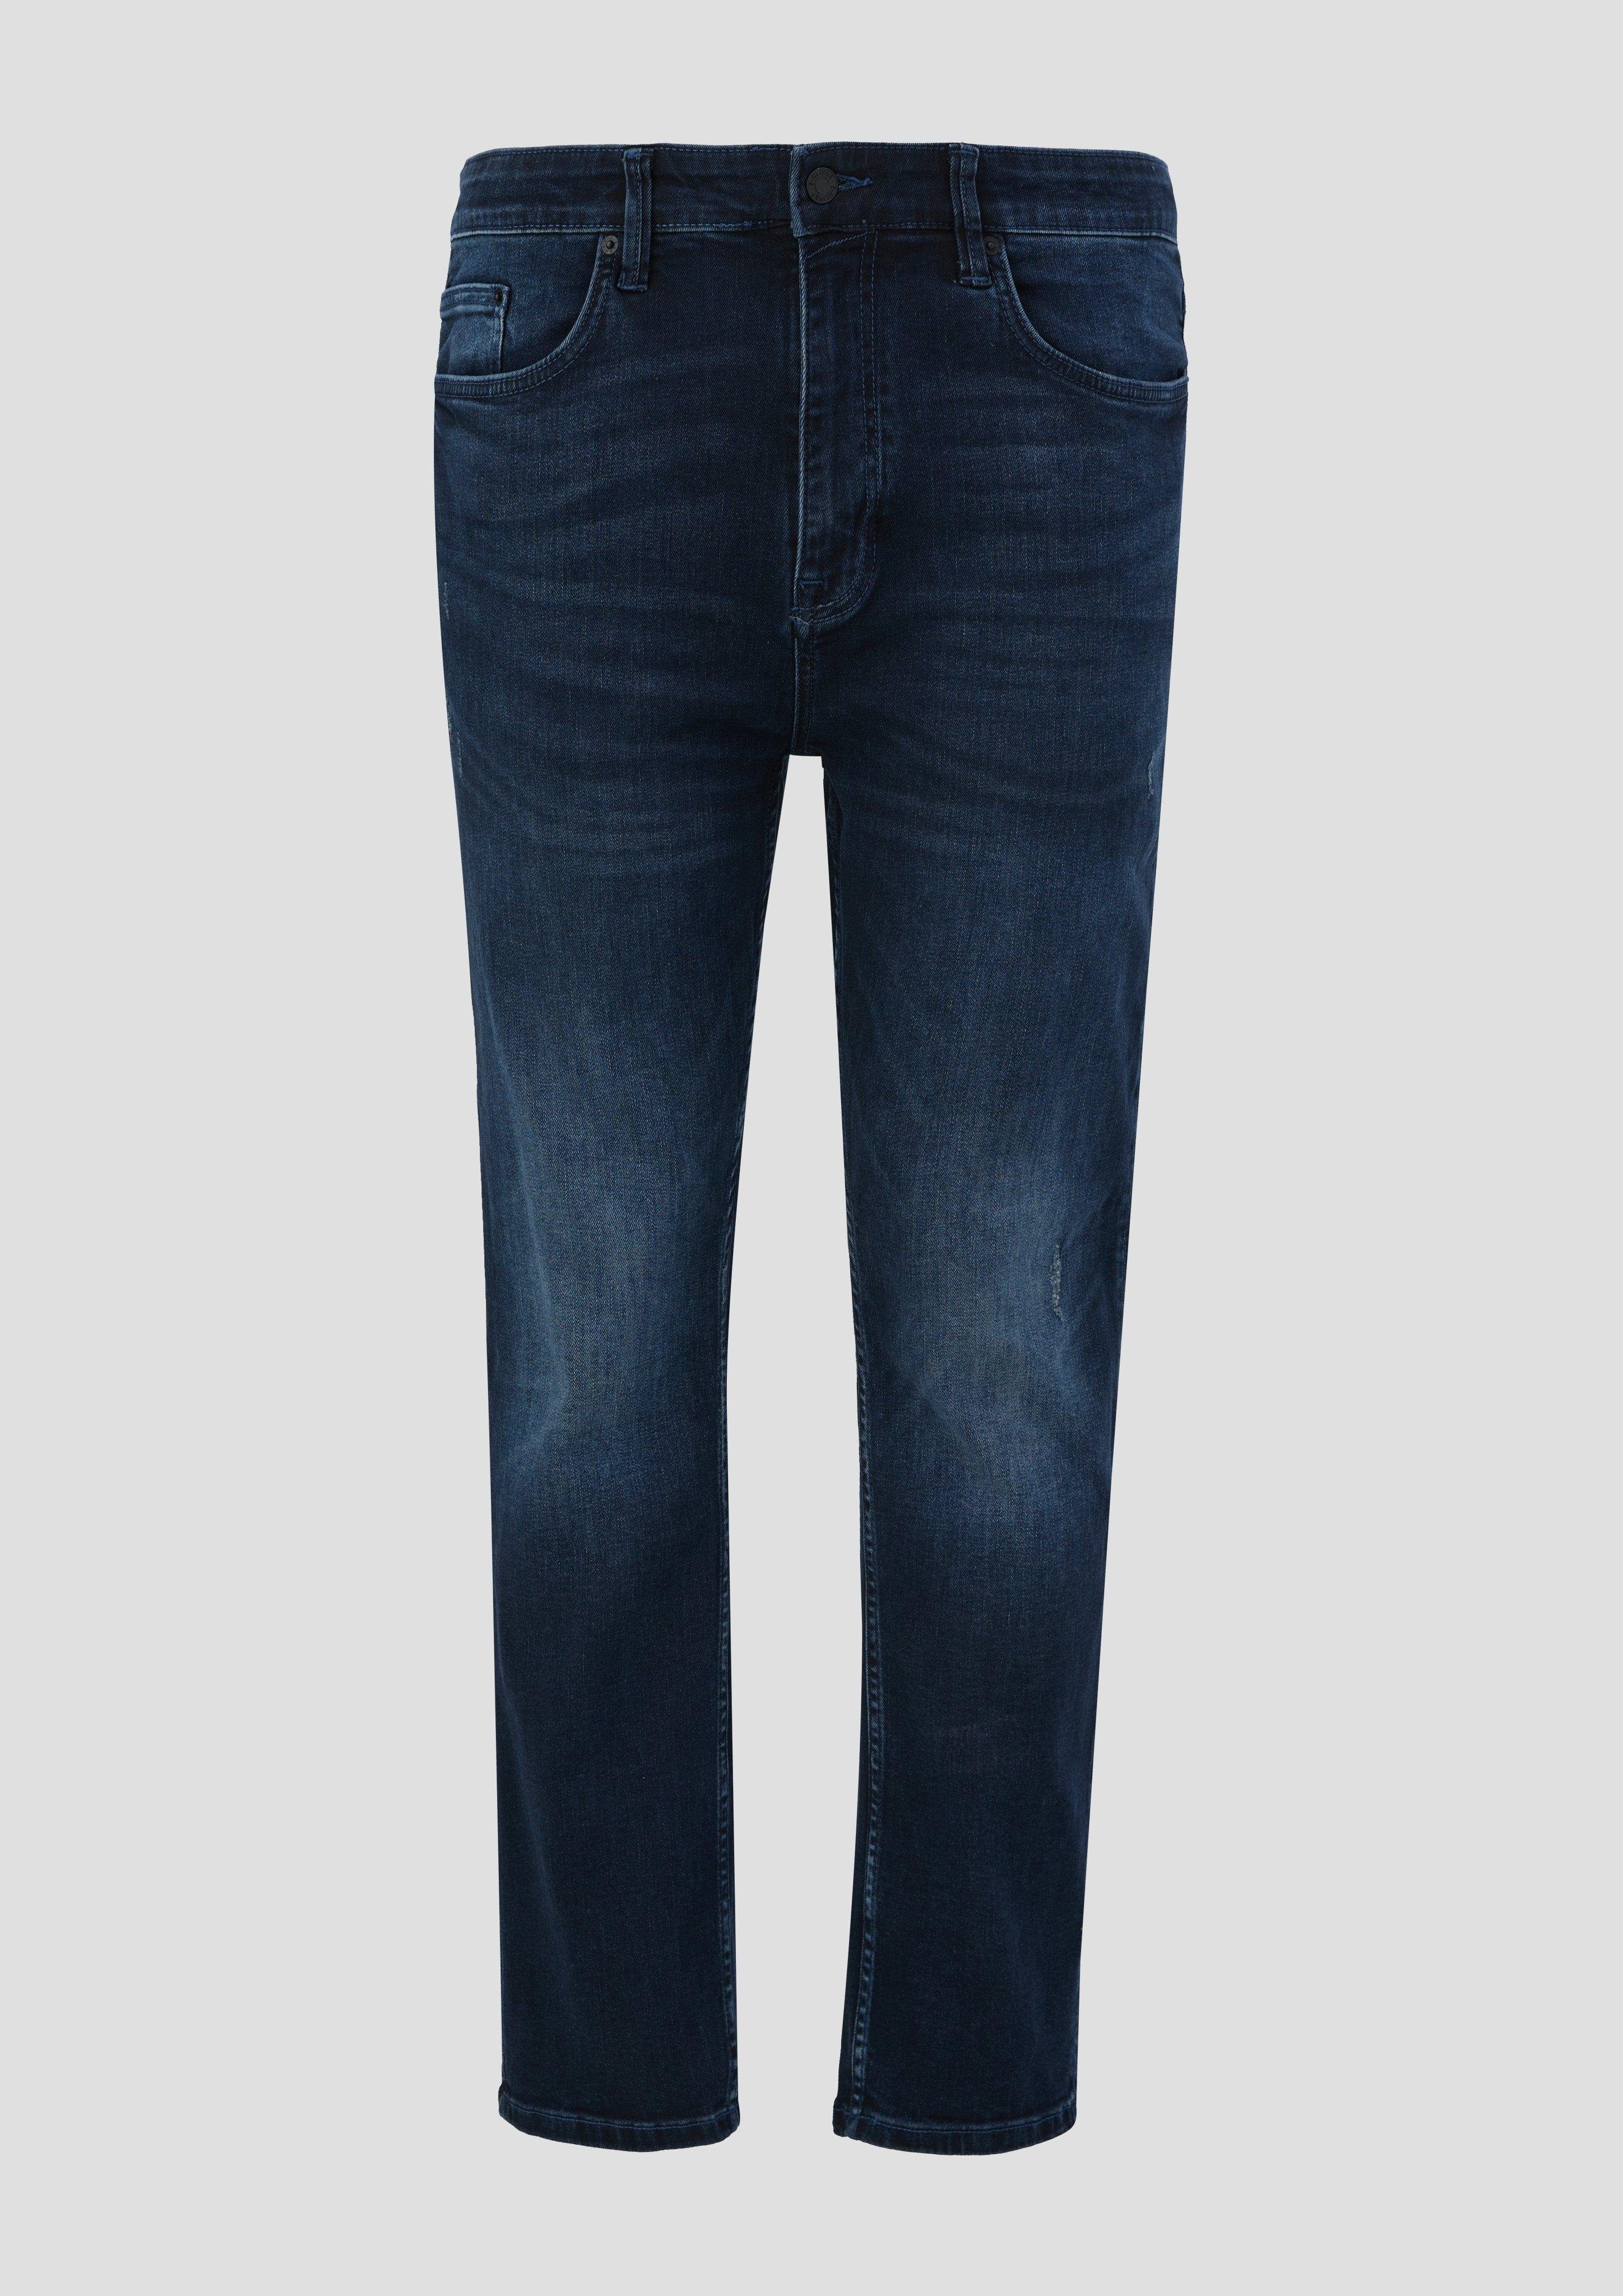 s.Oliver Stoffhose Jeans Casby / Relaxed Fit / Mid Rise / Straight Leg dunkelblau | Stoffhosen